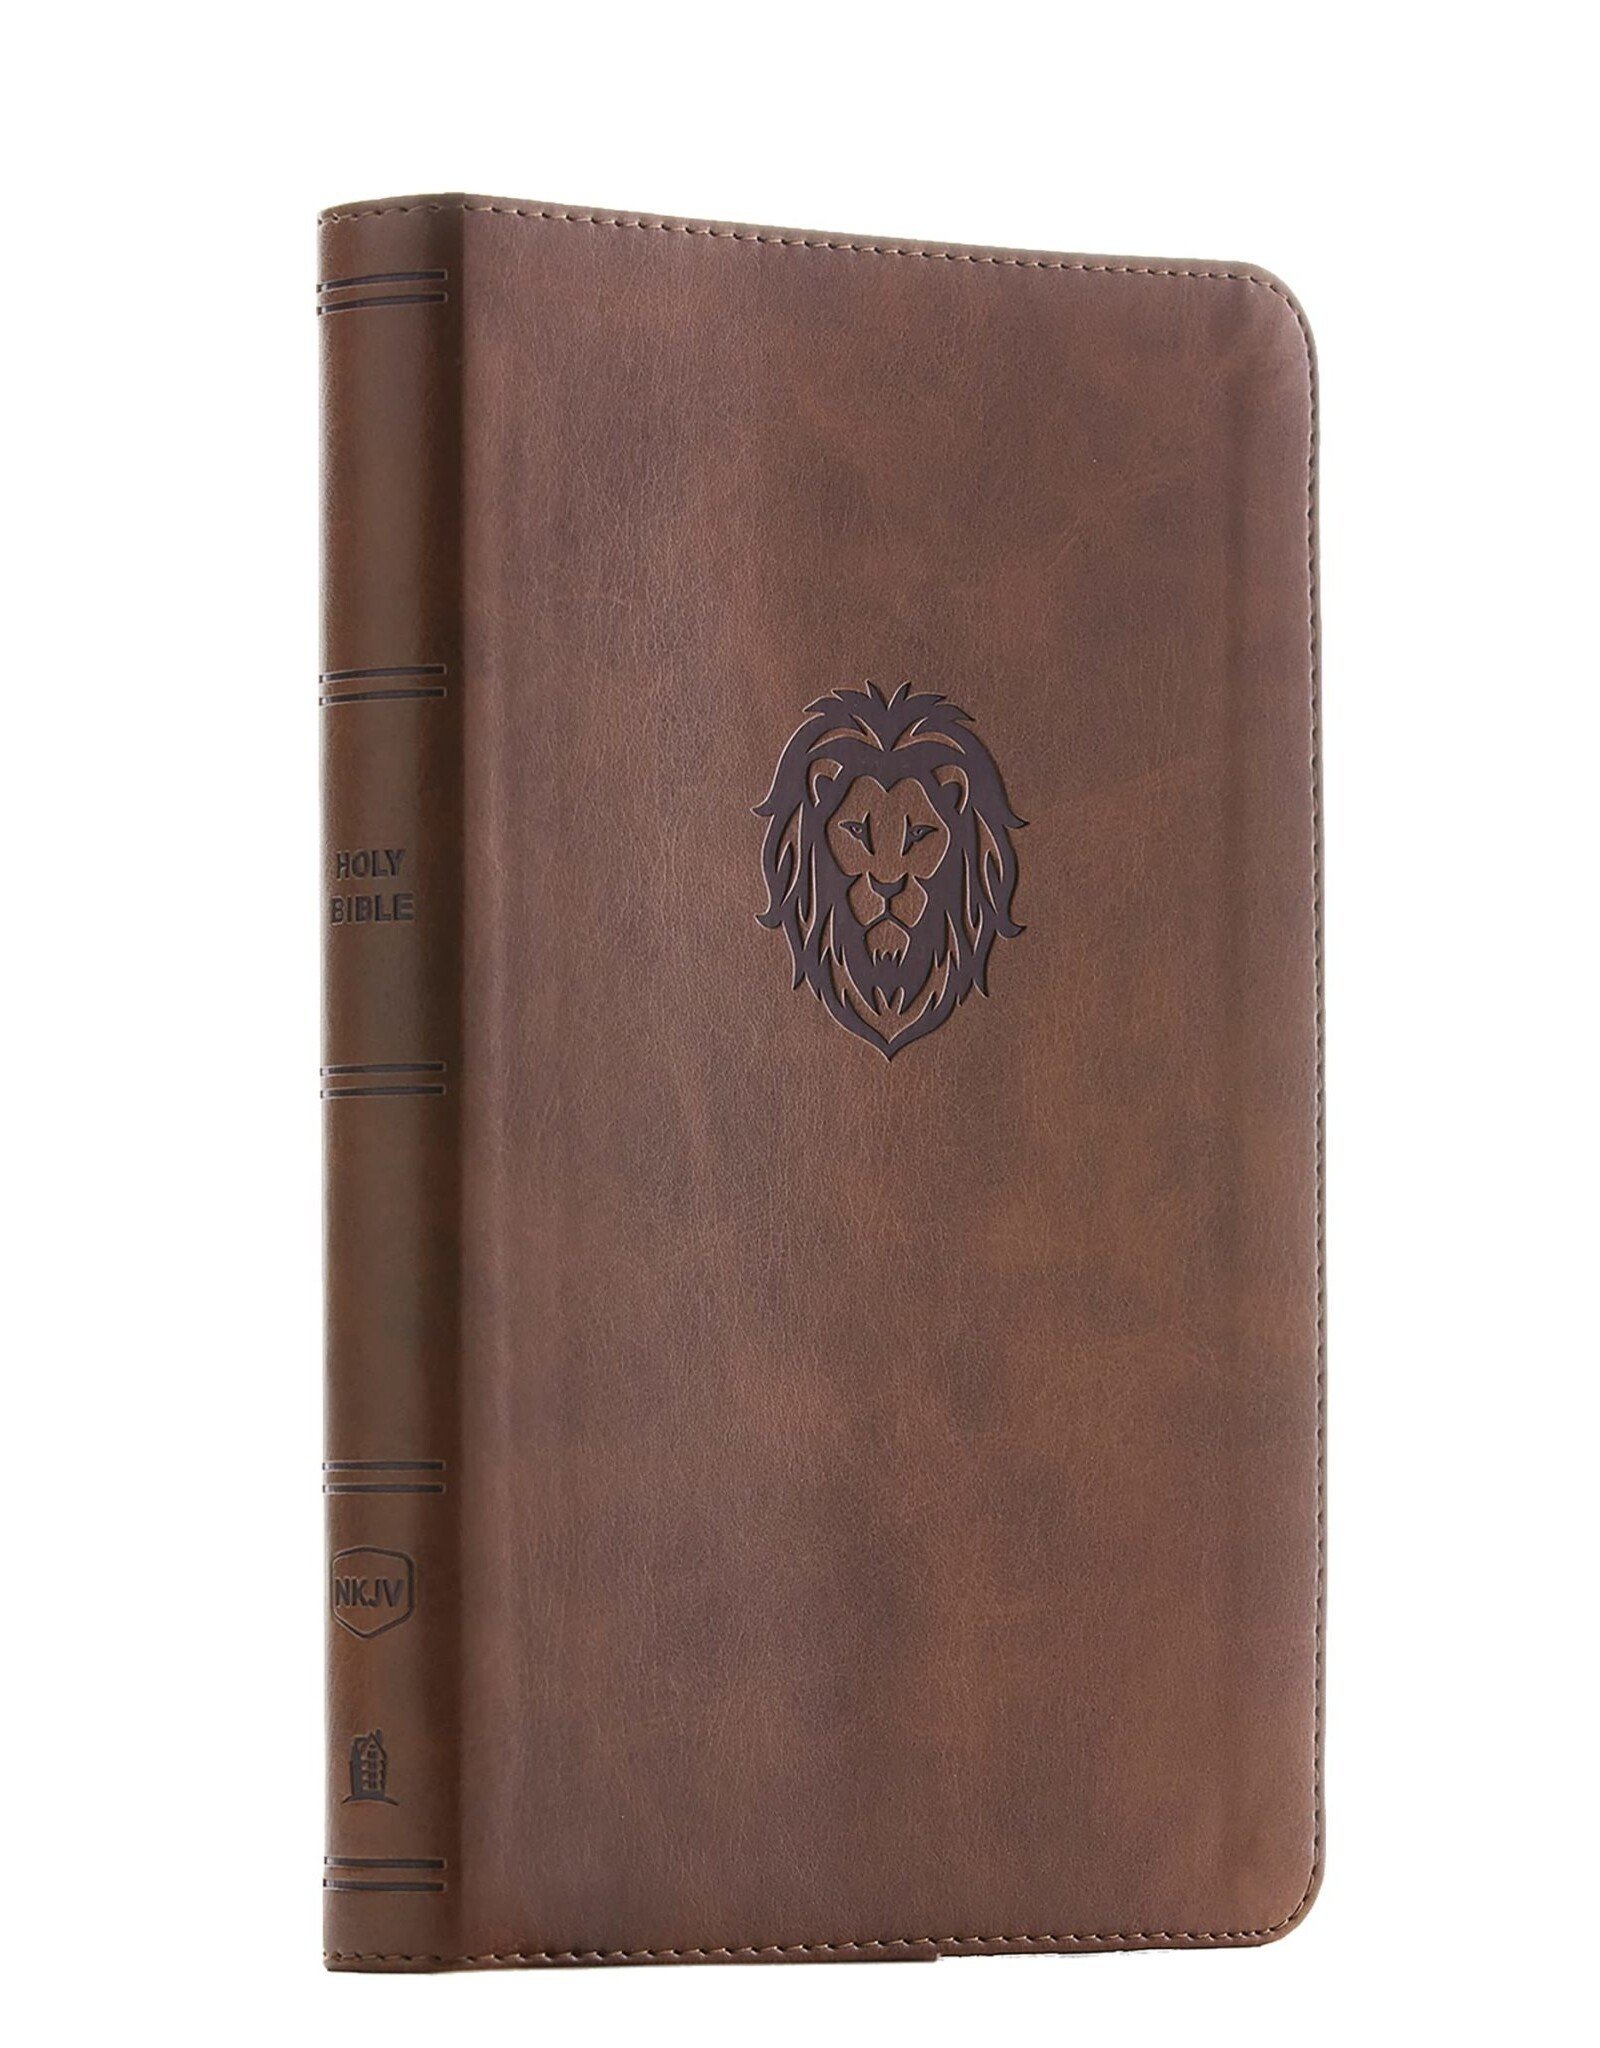 Thomas Nelson NKJV, Thinline Bible Youth Edition, Comfort Print, Leathersoft Brown